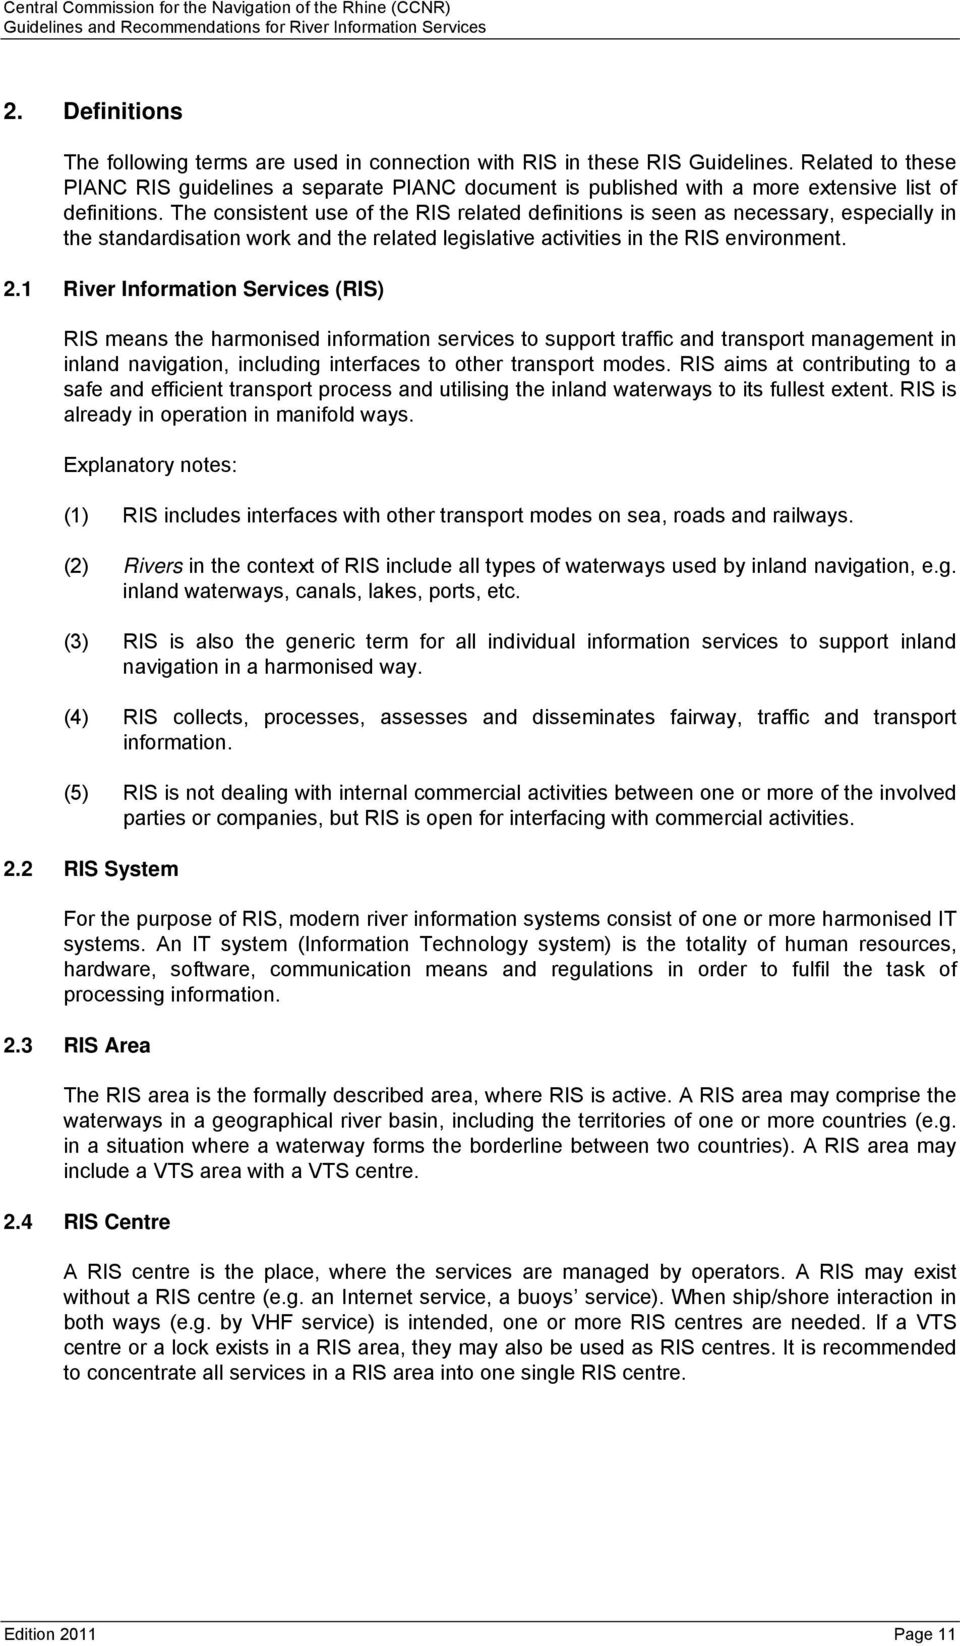 Related to these PIANC RIS guidelines a separate PIANC document is published with a more extensive list of definitions.